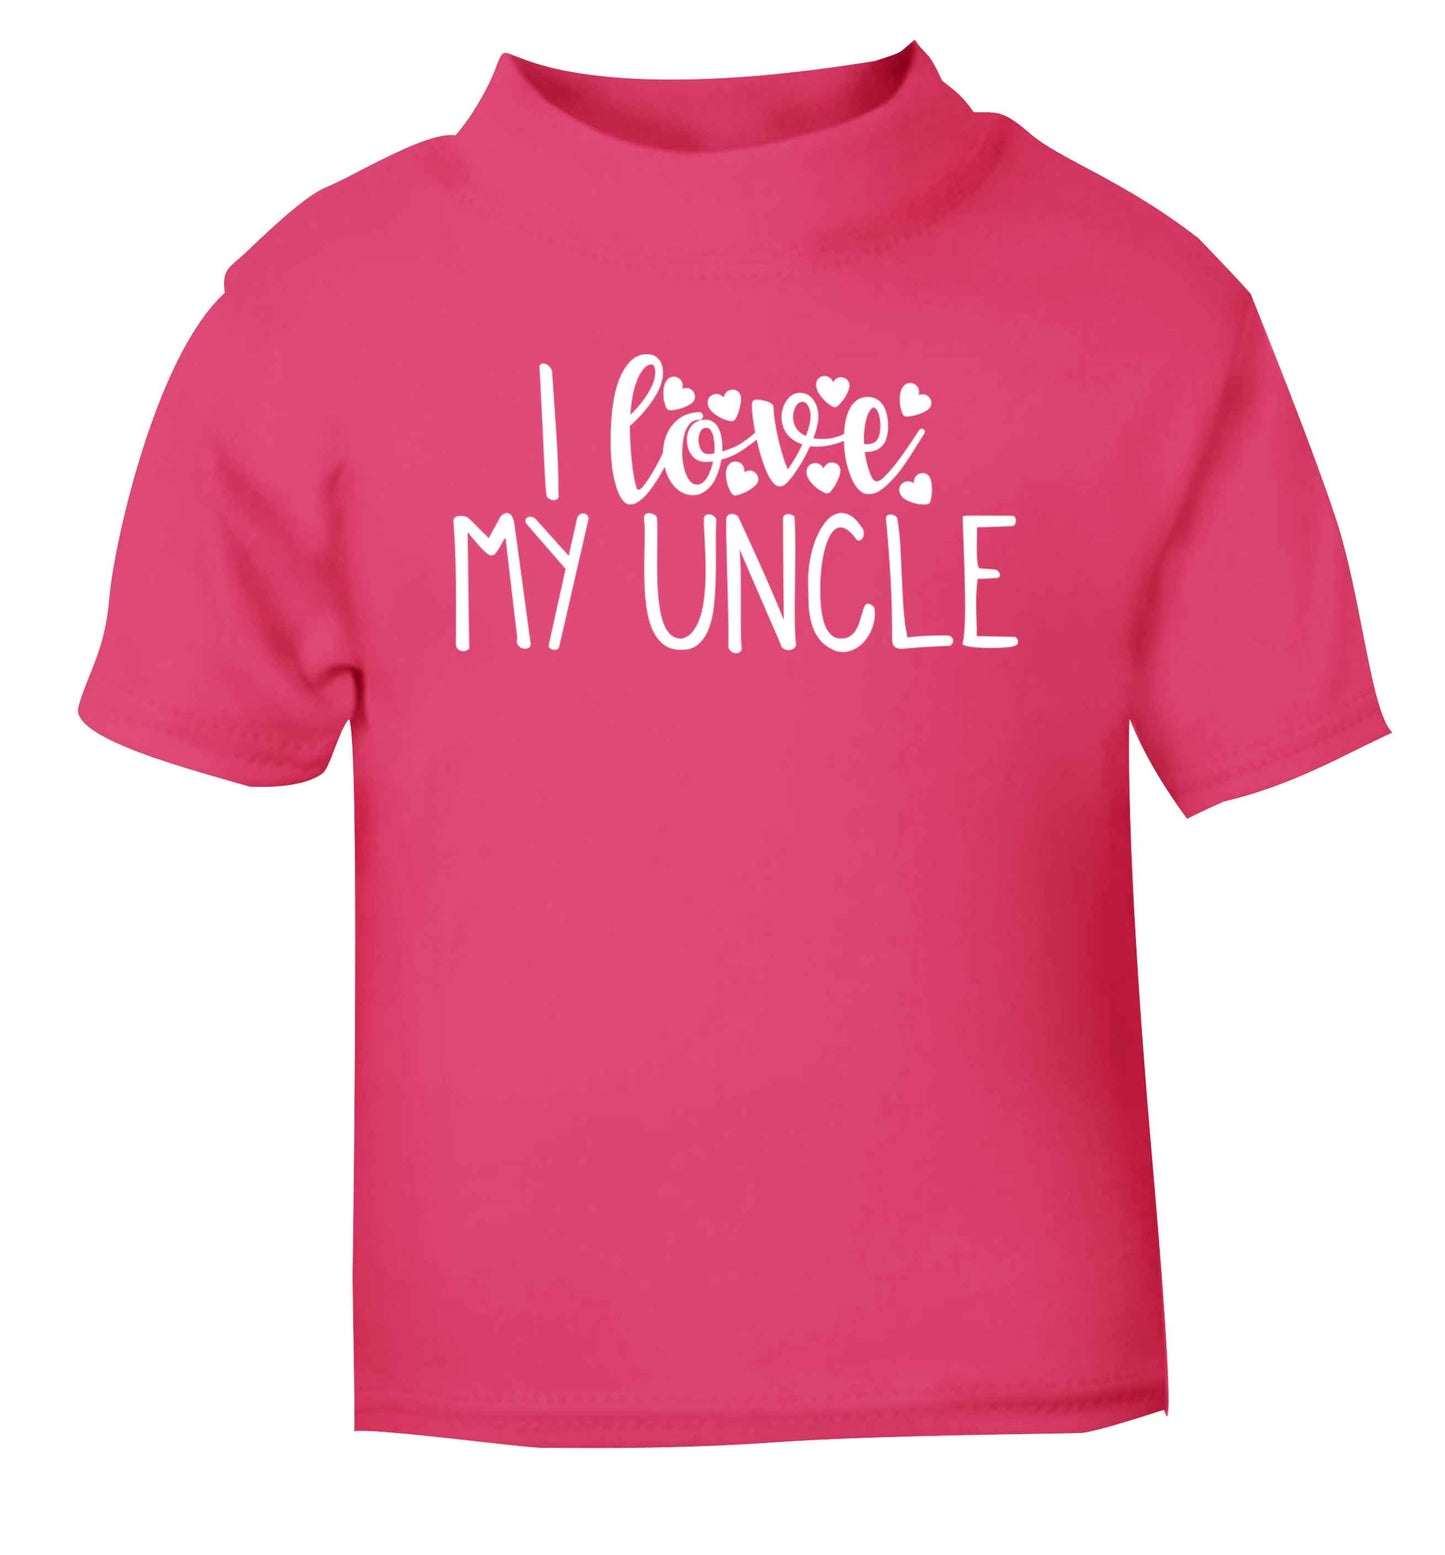 I love my uncle pink Baby Toddler Tshirt 2 Years